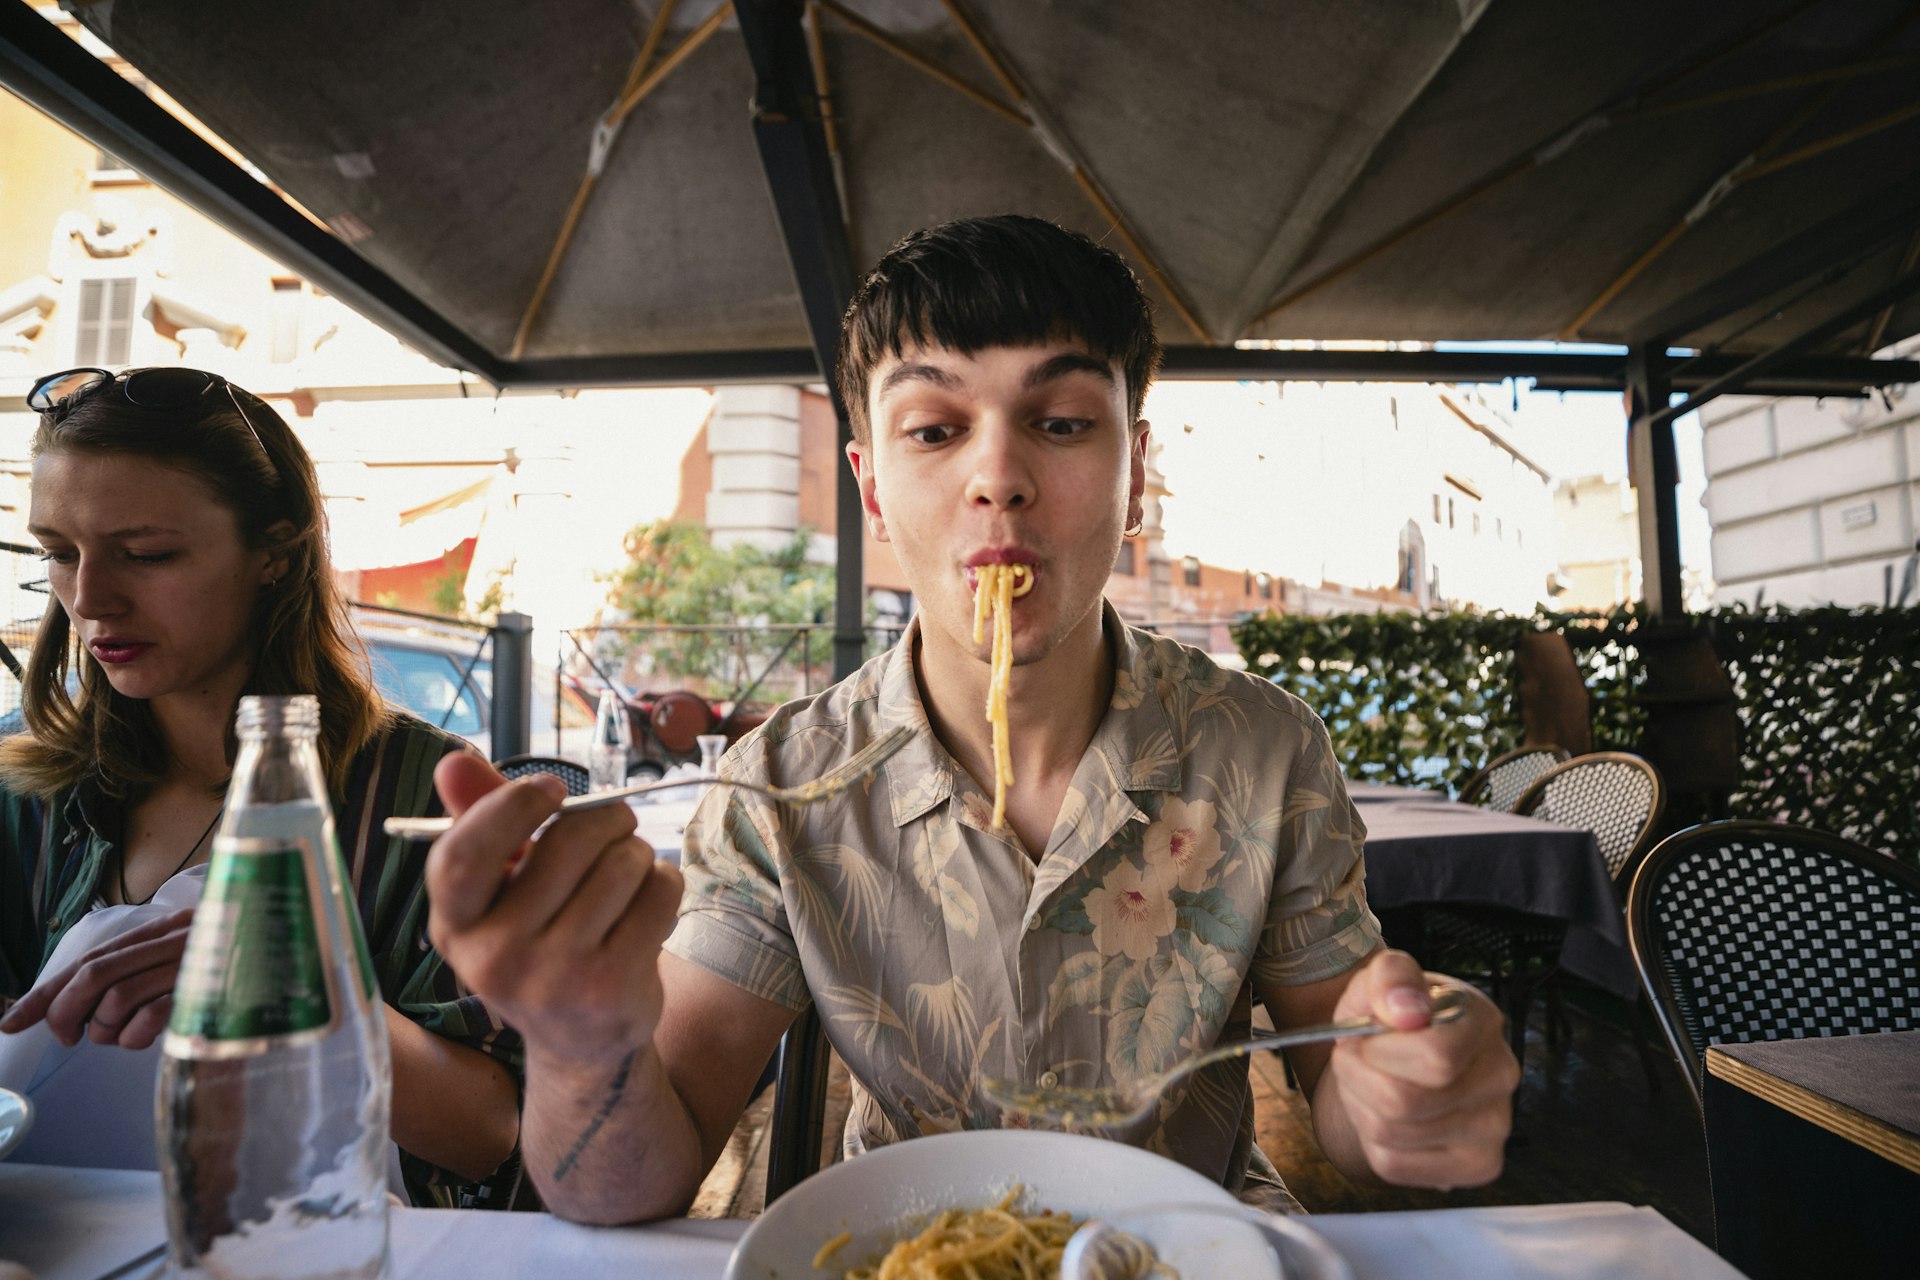 A front-view shot of a young man enjoying a delicious meal in Italy, he is wearing casual clothing